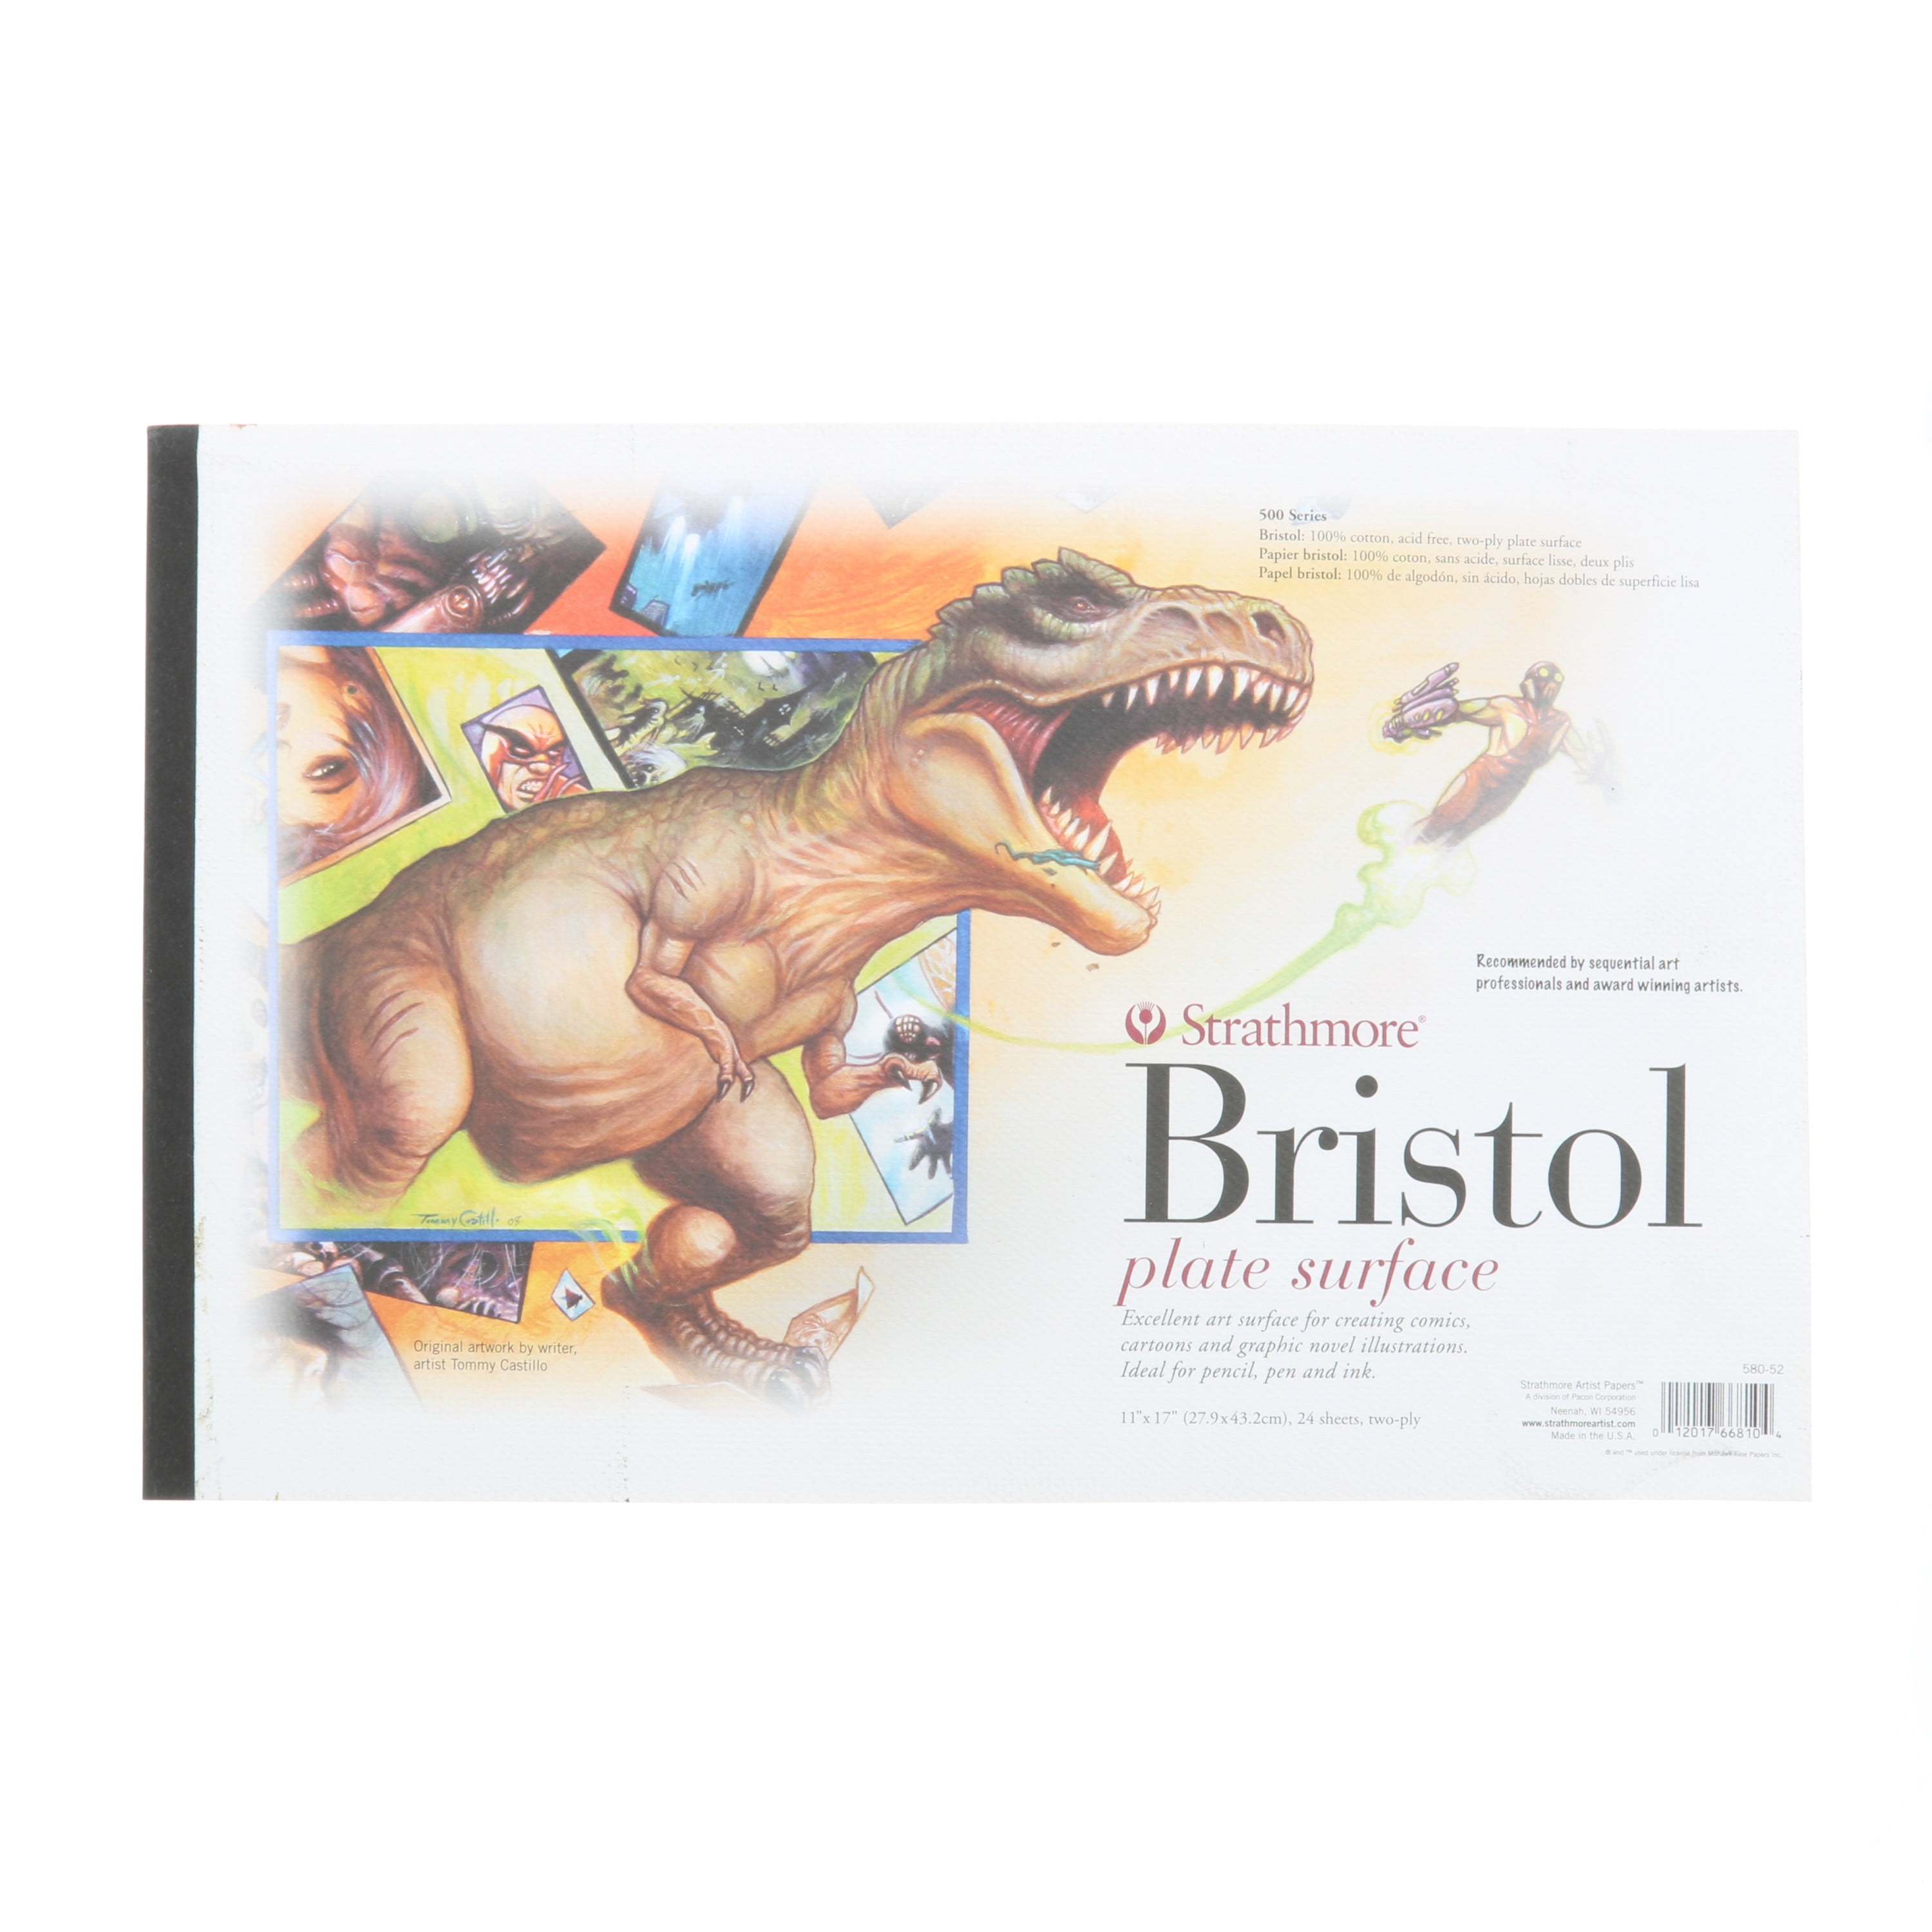 Strathmore 200 Series Bristol Drawing Pad 24 Sheets 100 lb 11 x 17 Inches